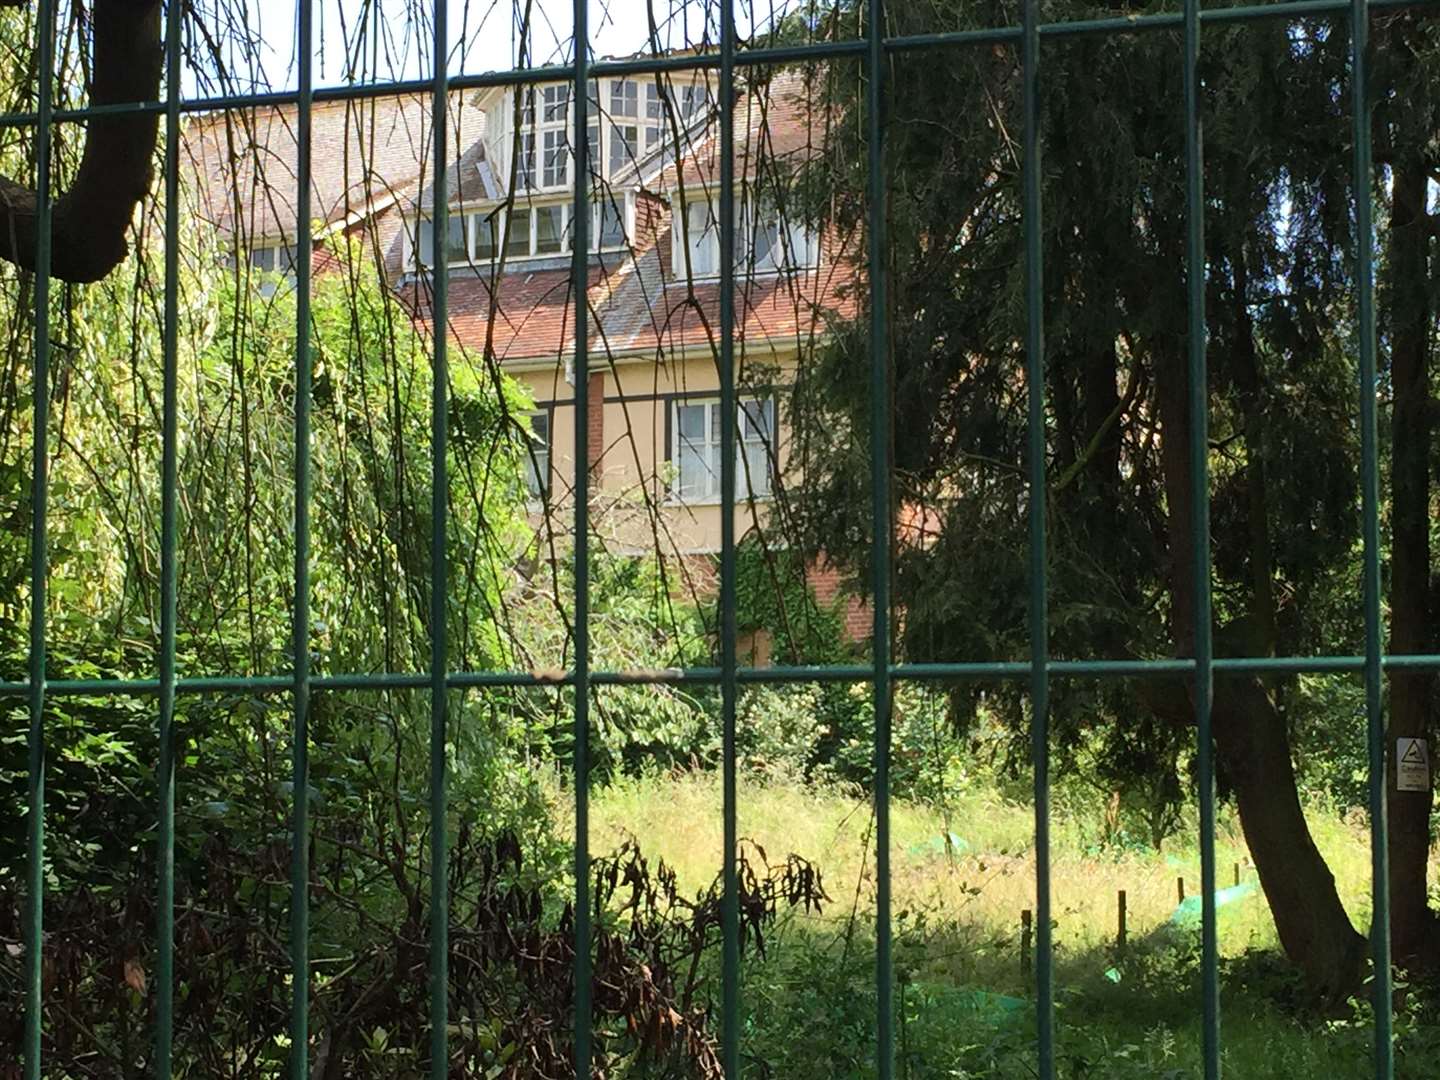 Herne Bay Court used to have manicured lawns, but is now overgrown and an eyesore